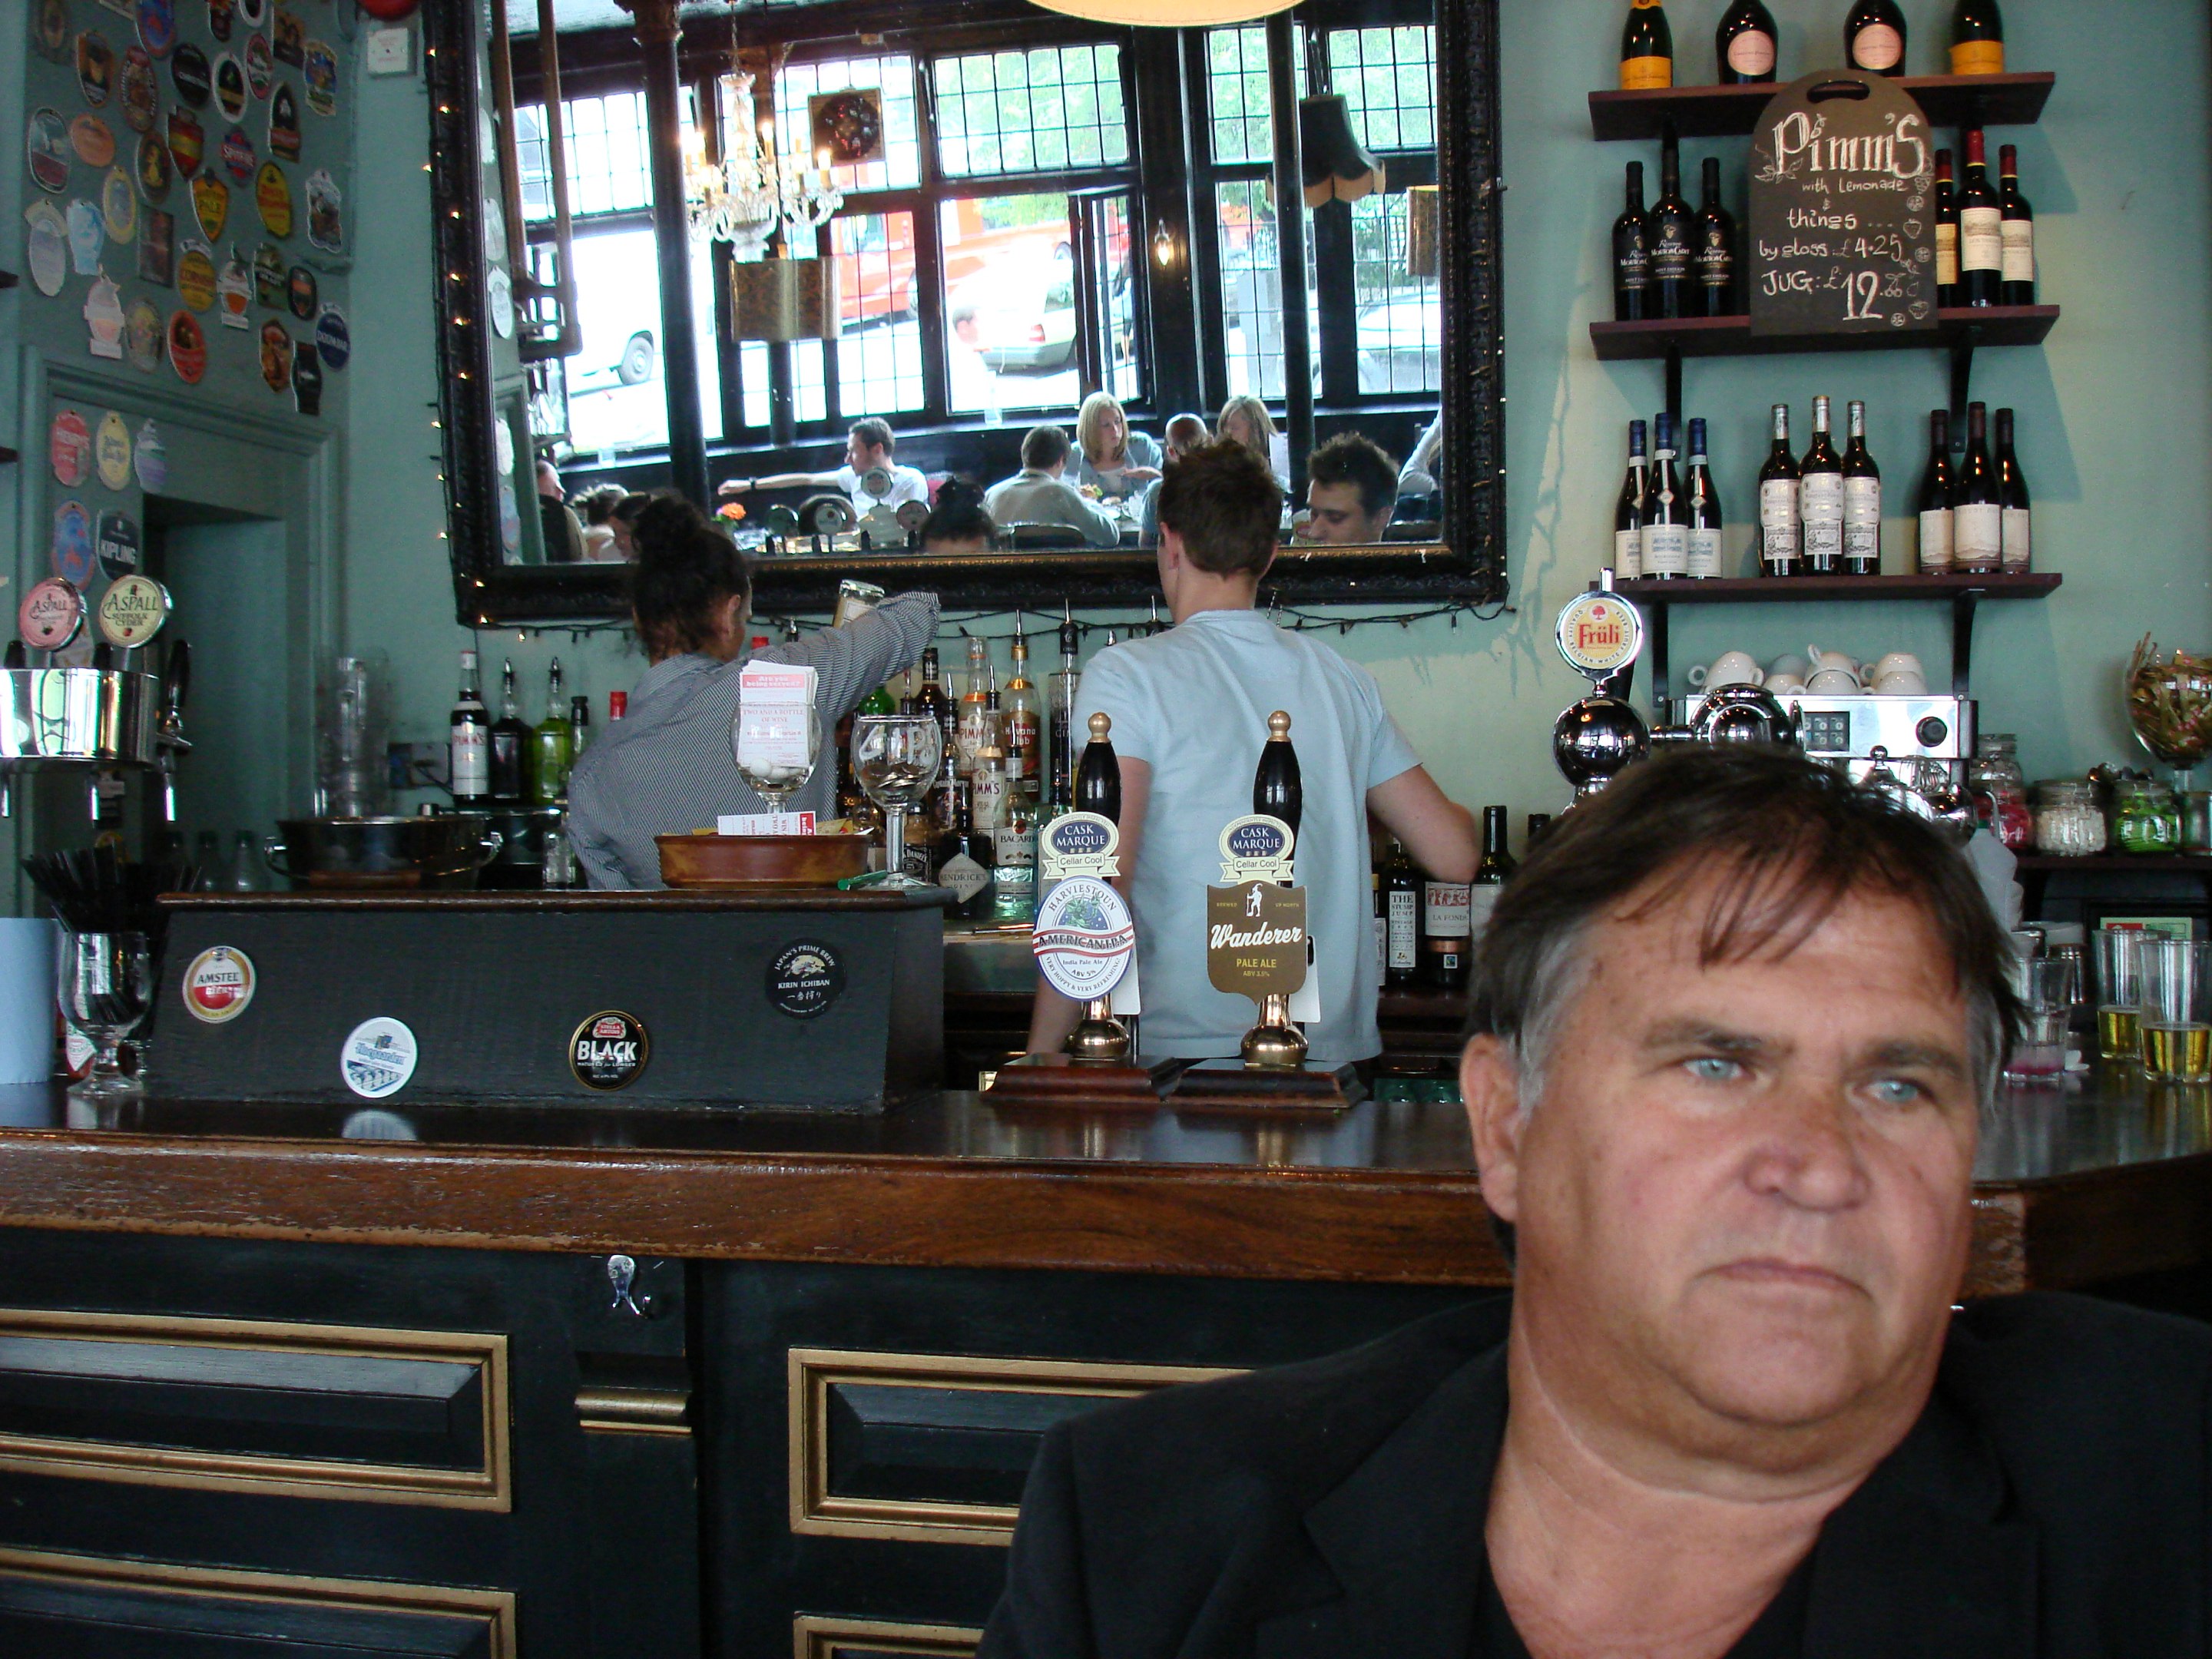 A bar in London, Portobello Rd. A drink after visiting Stonehenge.